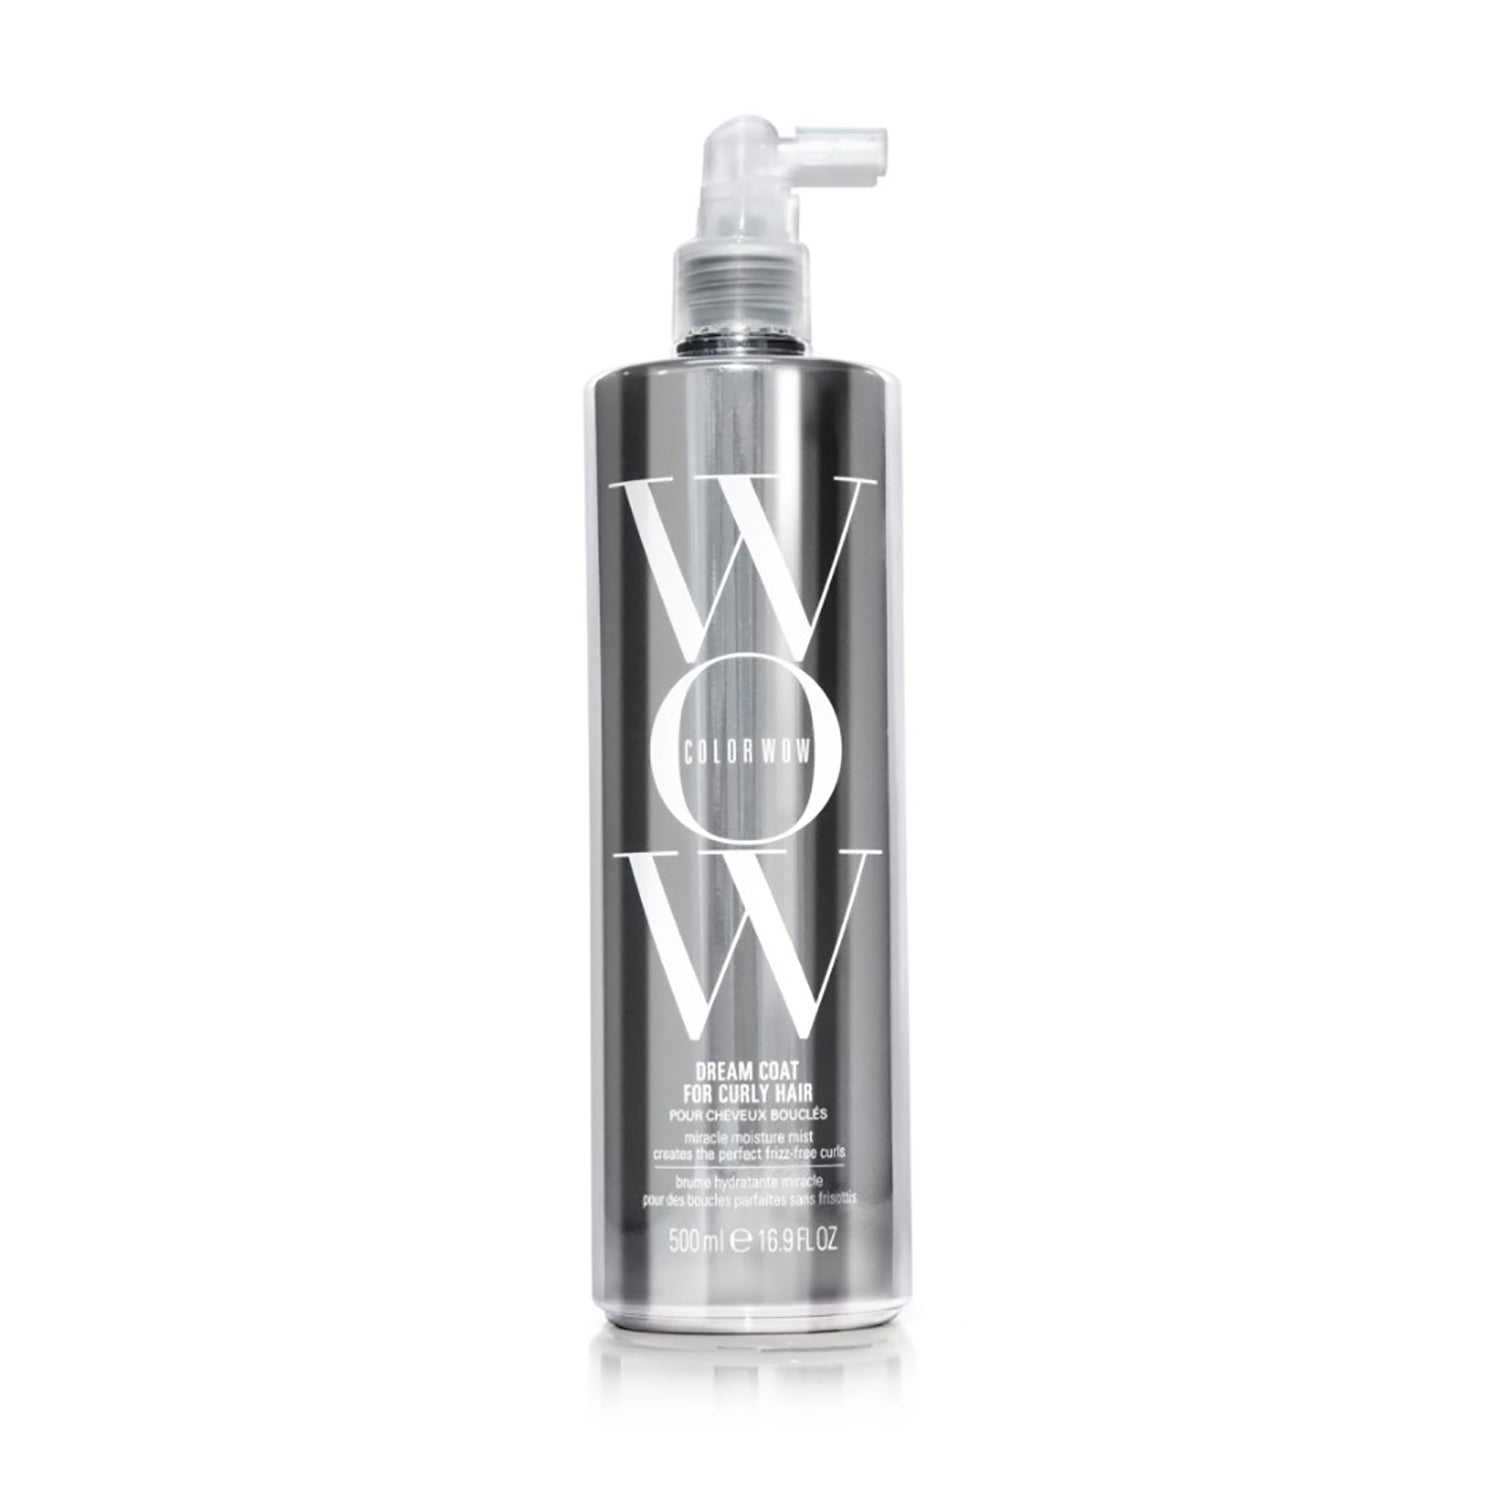 Color Wow Dream Coat Spray 500ml, Color WOW